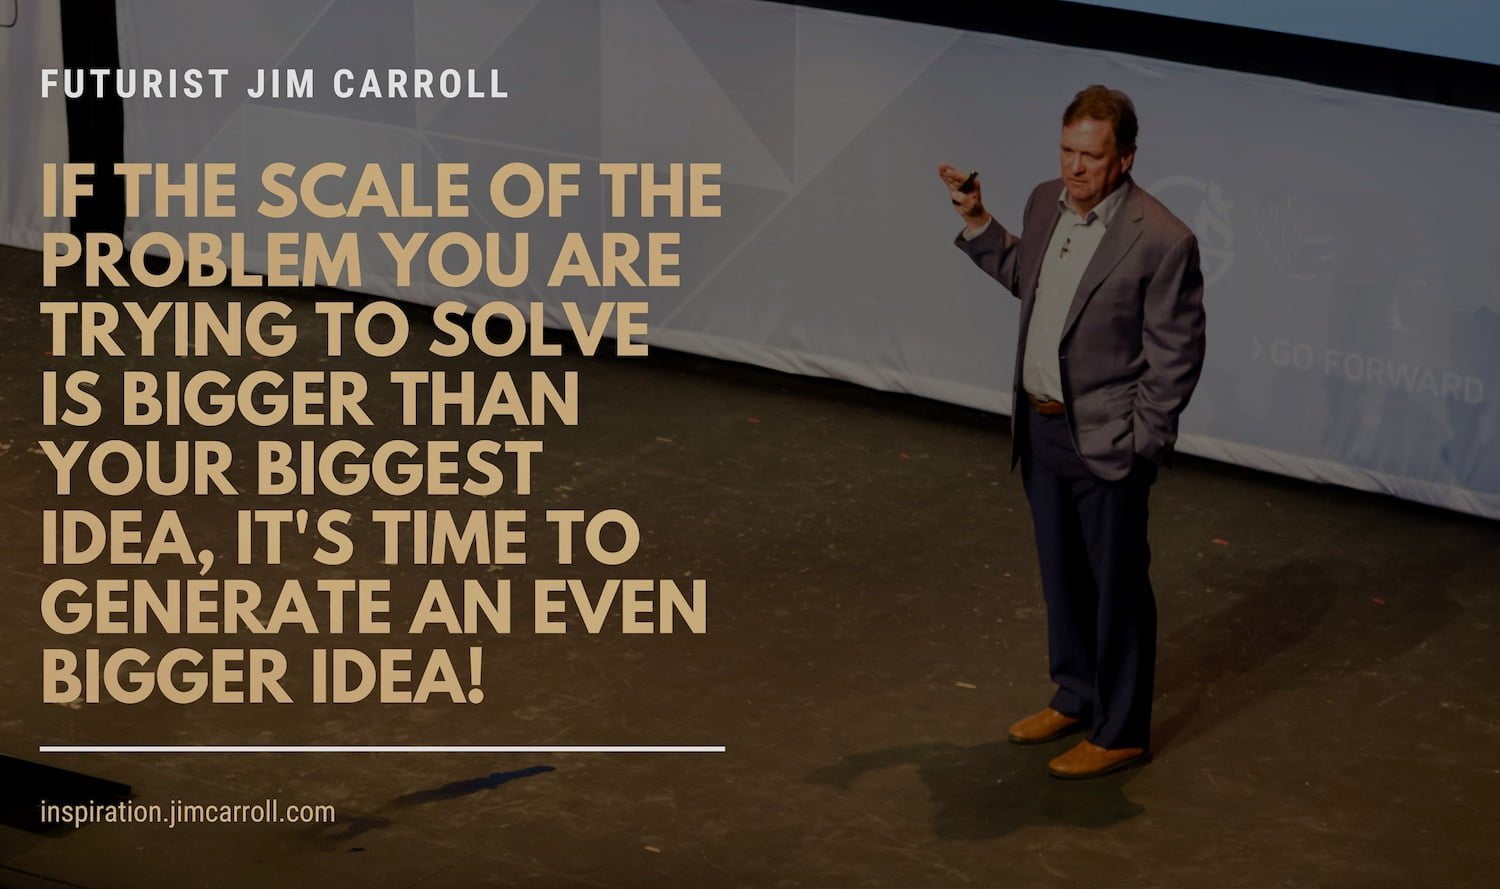 Daily Inspiration: "If the scale of the problem you are trying to solve is bigger than your biggest idea, it's time to generate an even bigger idea!"